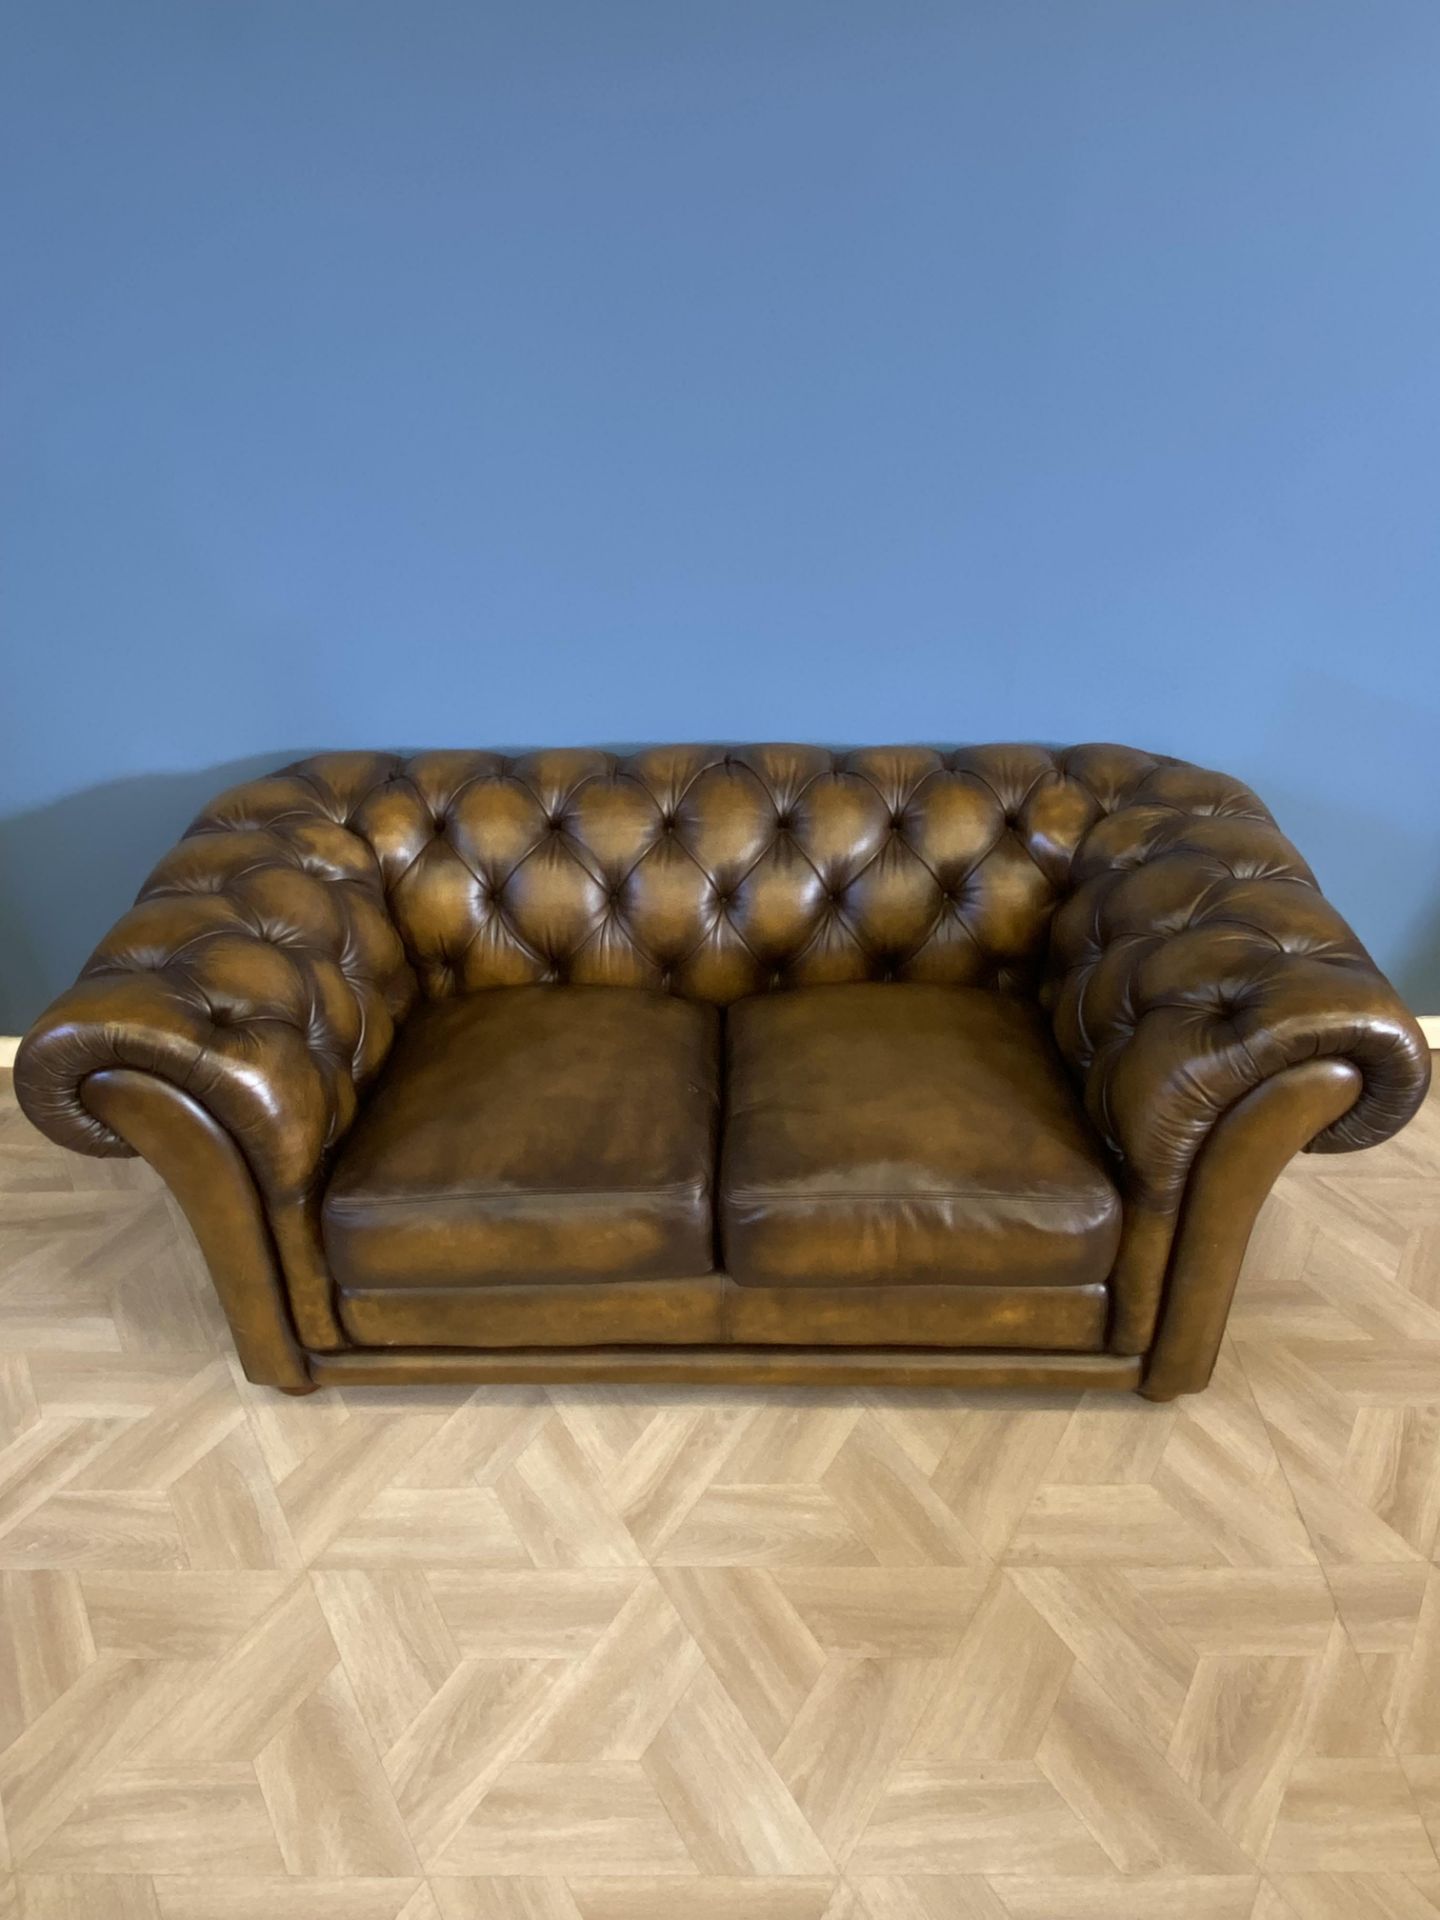 Button back leather two seat Chesterfield sofa - Image 2 of 11